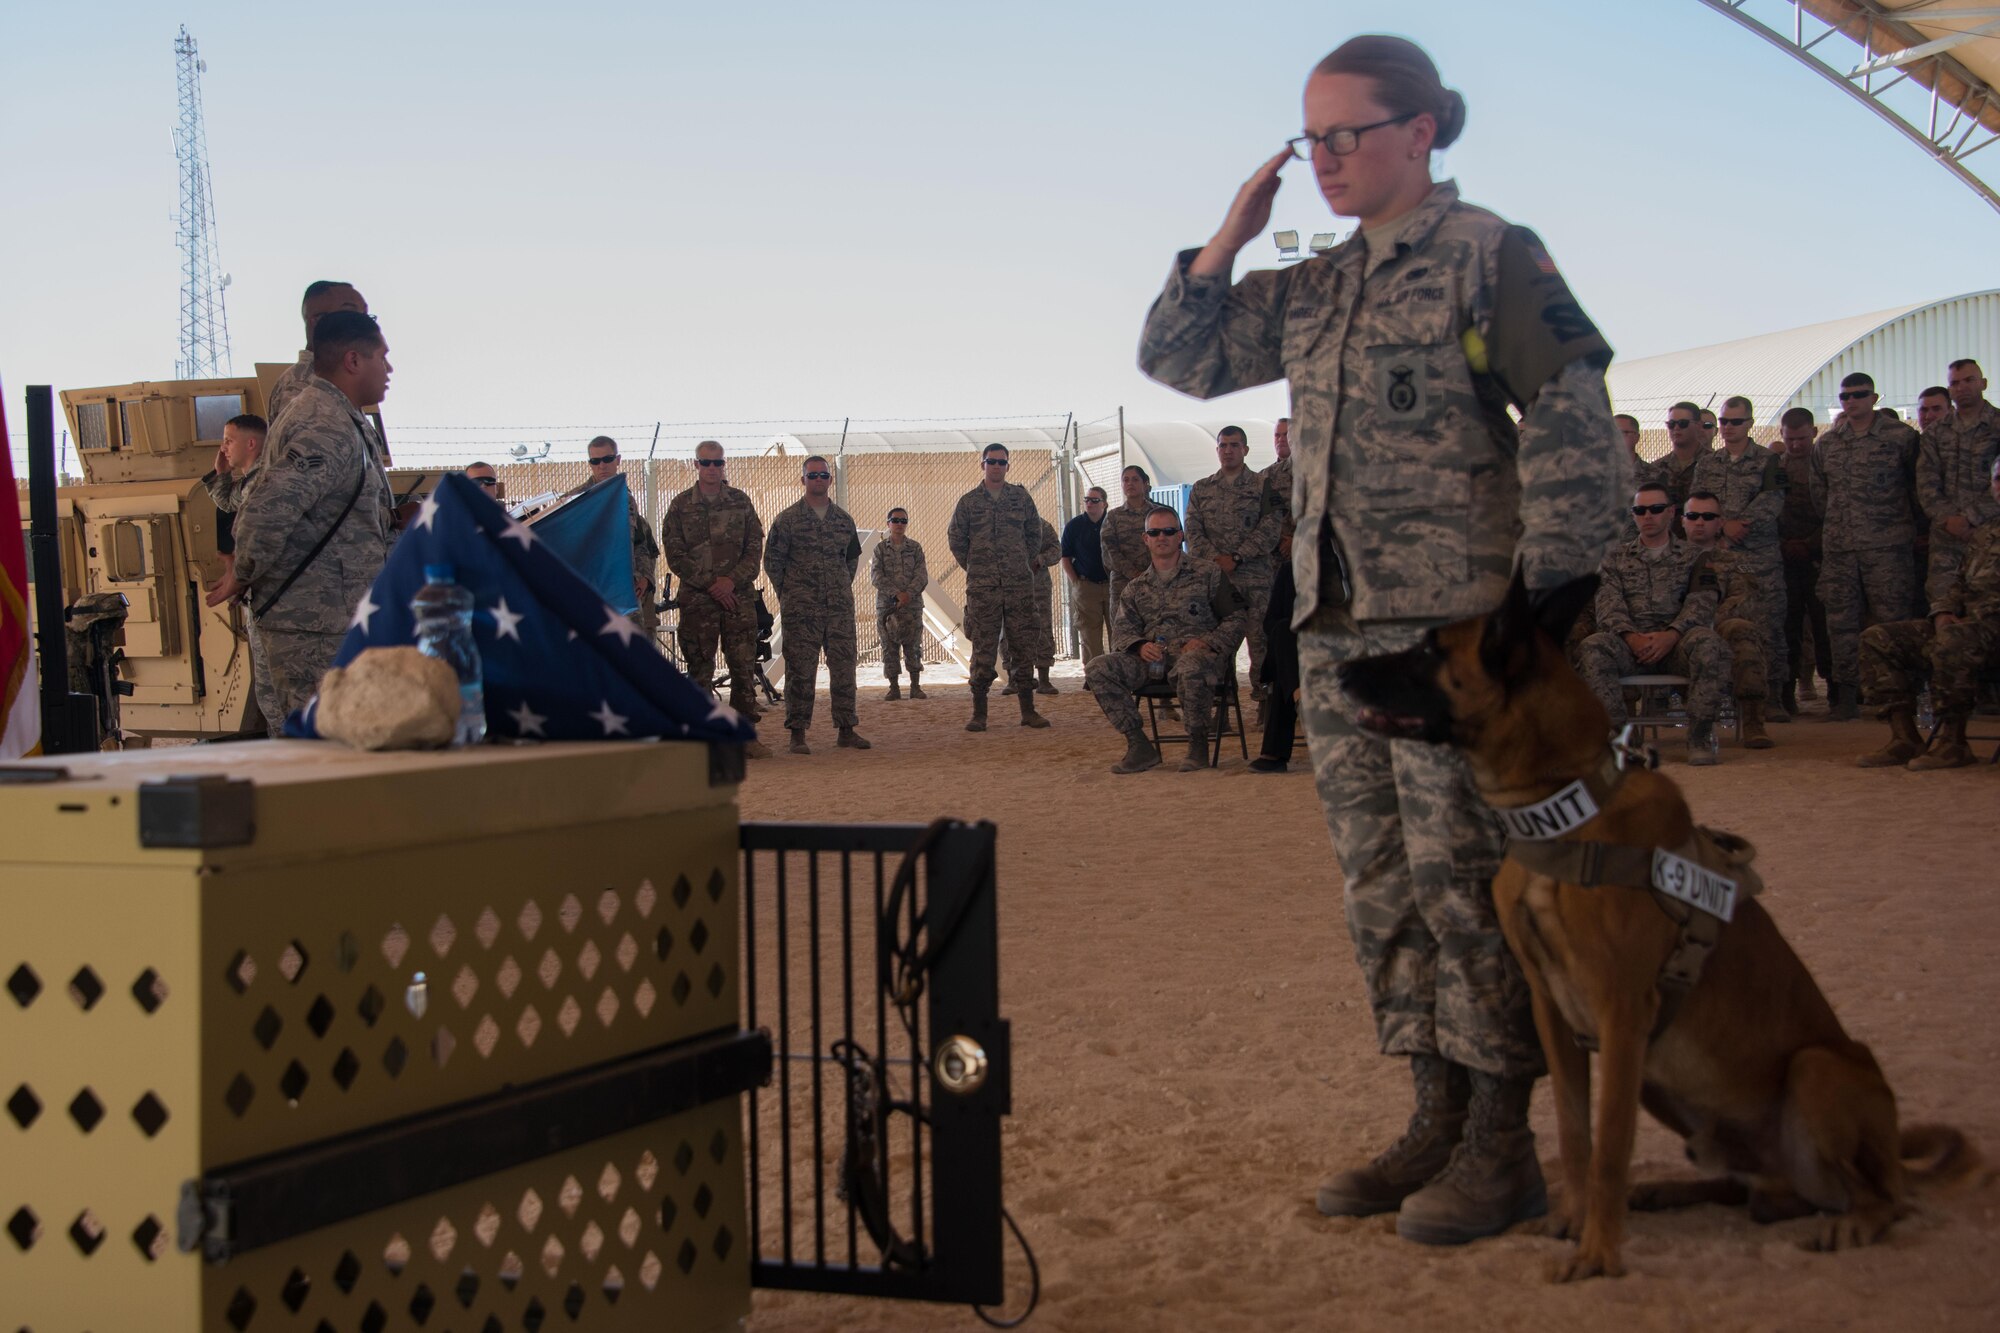 Senior Airman Sara Yandell, a military working dog handler with the 386th Expeditionary Security Forces Squadron, salutes the kennel display at the opening ceremony for 2017 Police Week at an undisclosed location in Southwest Asia, May 14, 2017. The empty kennel has long been a symbol of solace in the military working dog community. The kennel is empty; he is gone but not forgotten. (U.S. Air Force photo/TSgt Jonathan Hehnly)